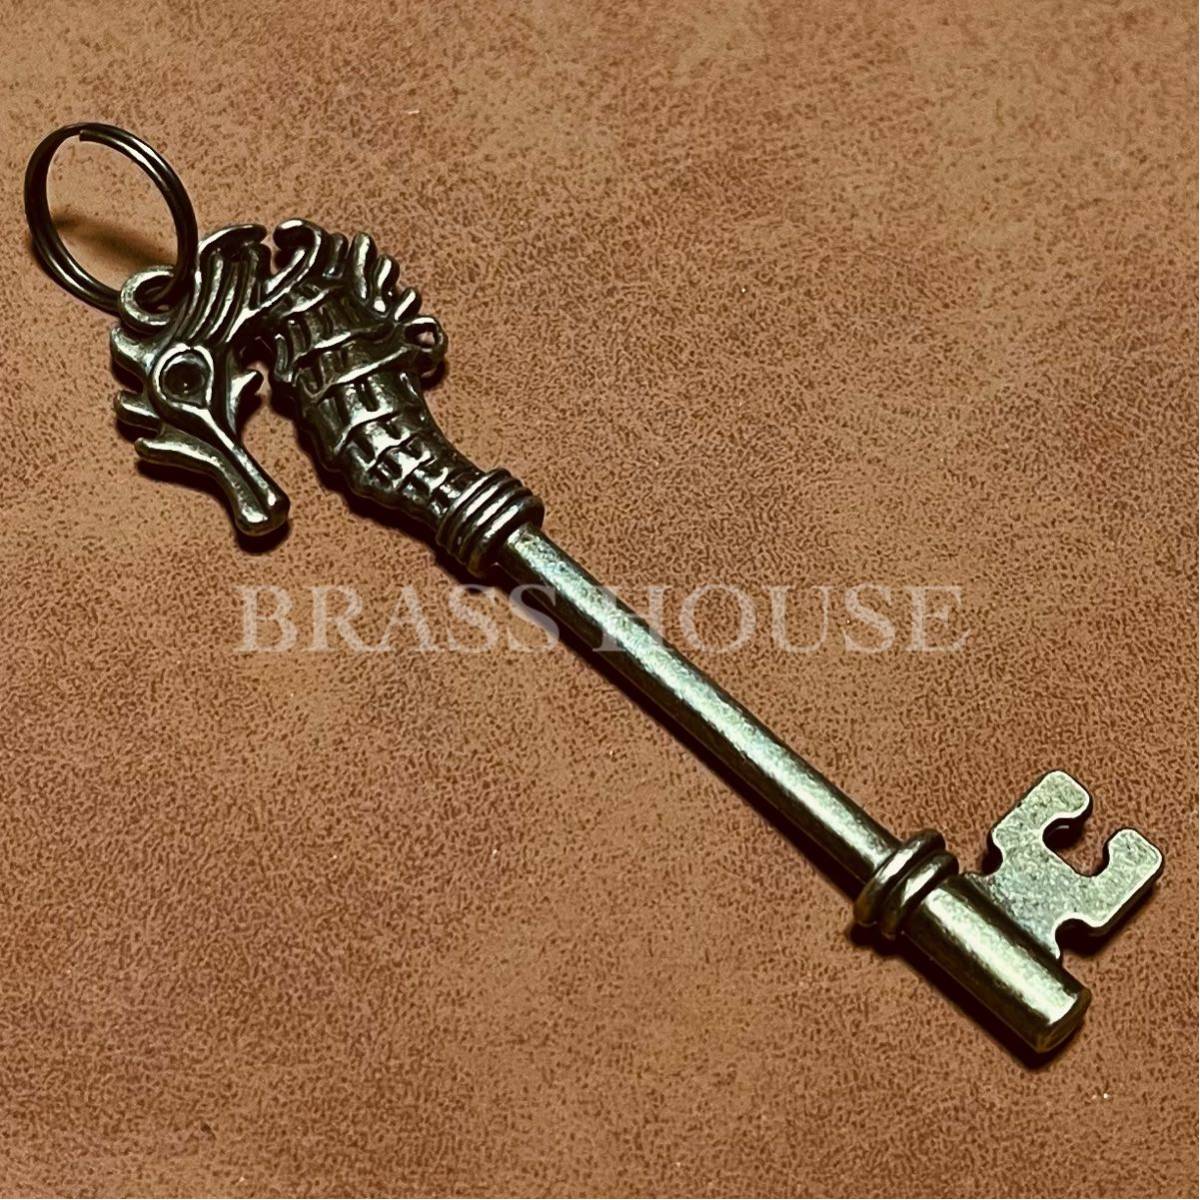 G2si- hose seahorse antique key key key holder better fortune .. thing Vintage key ring real accessory Gold 